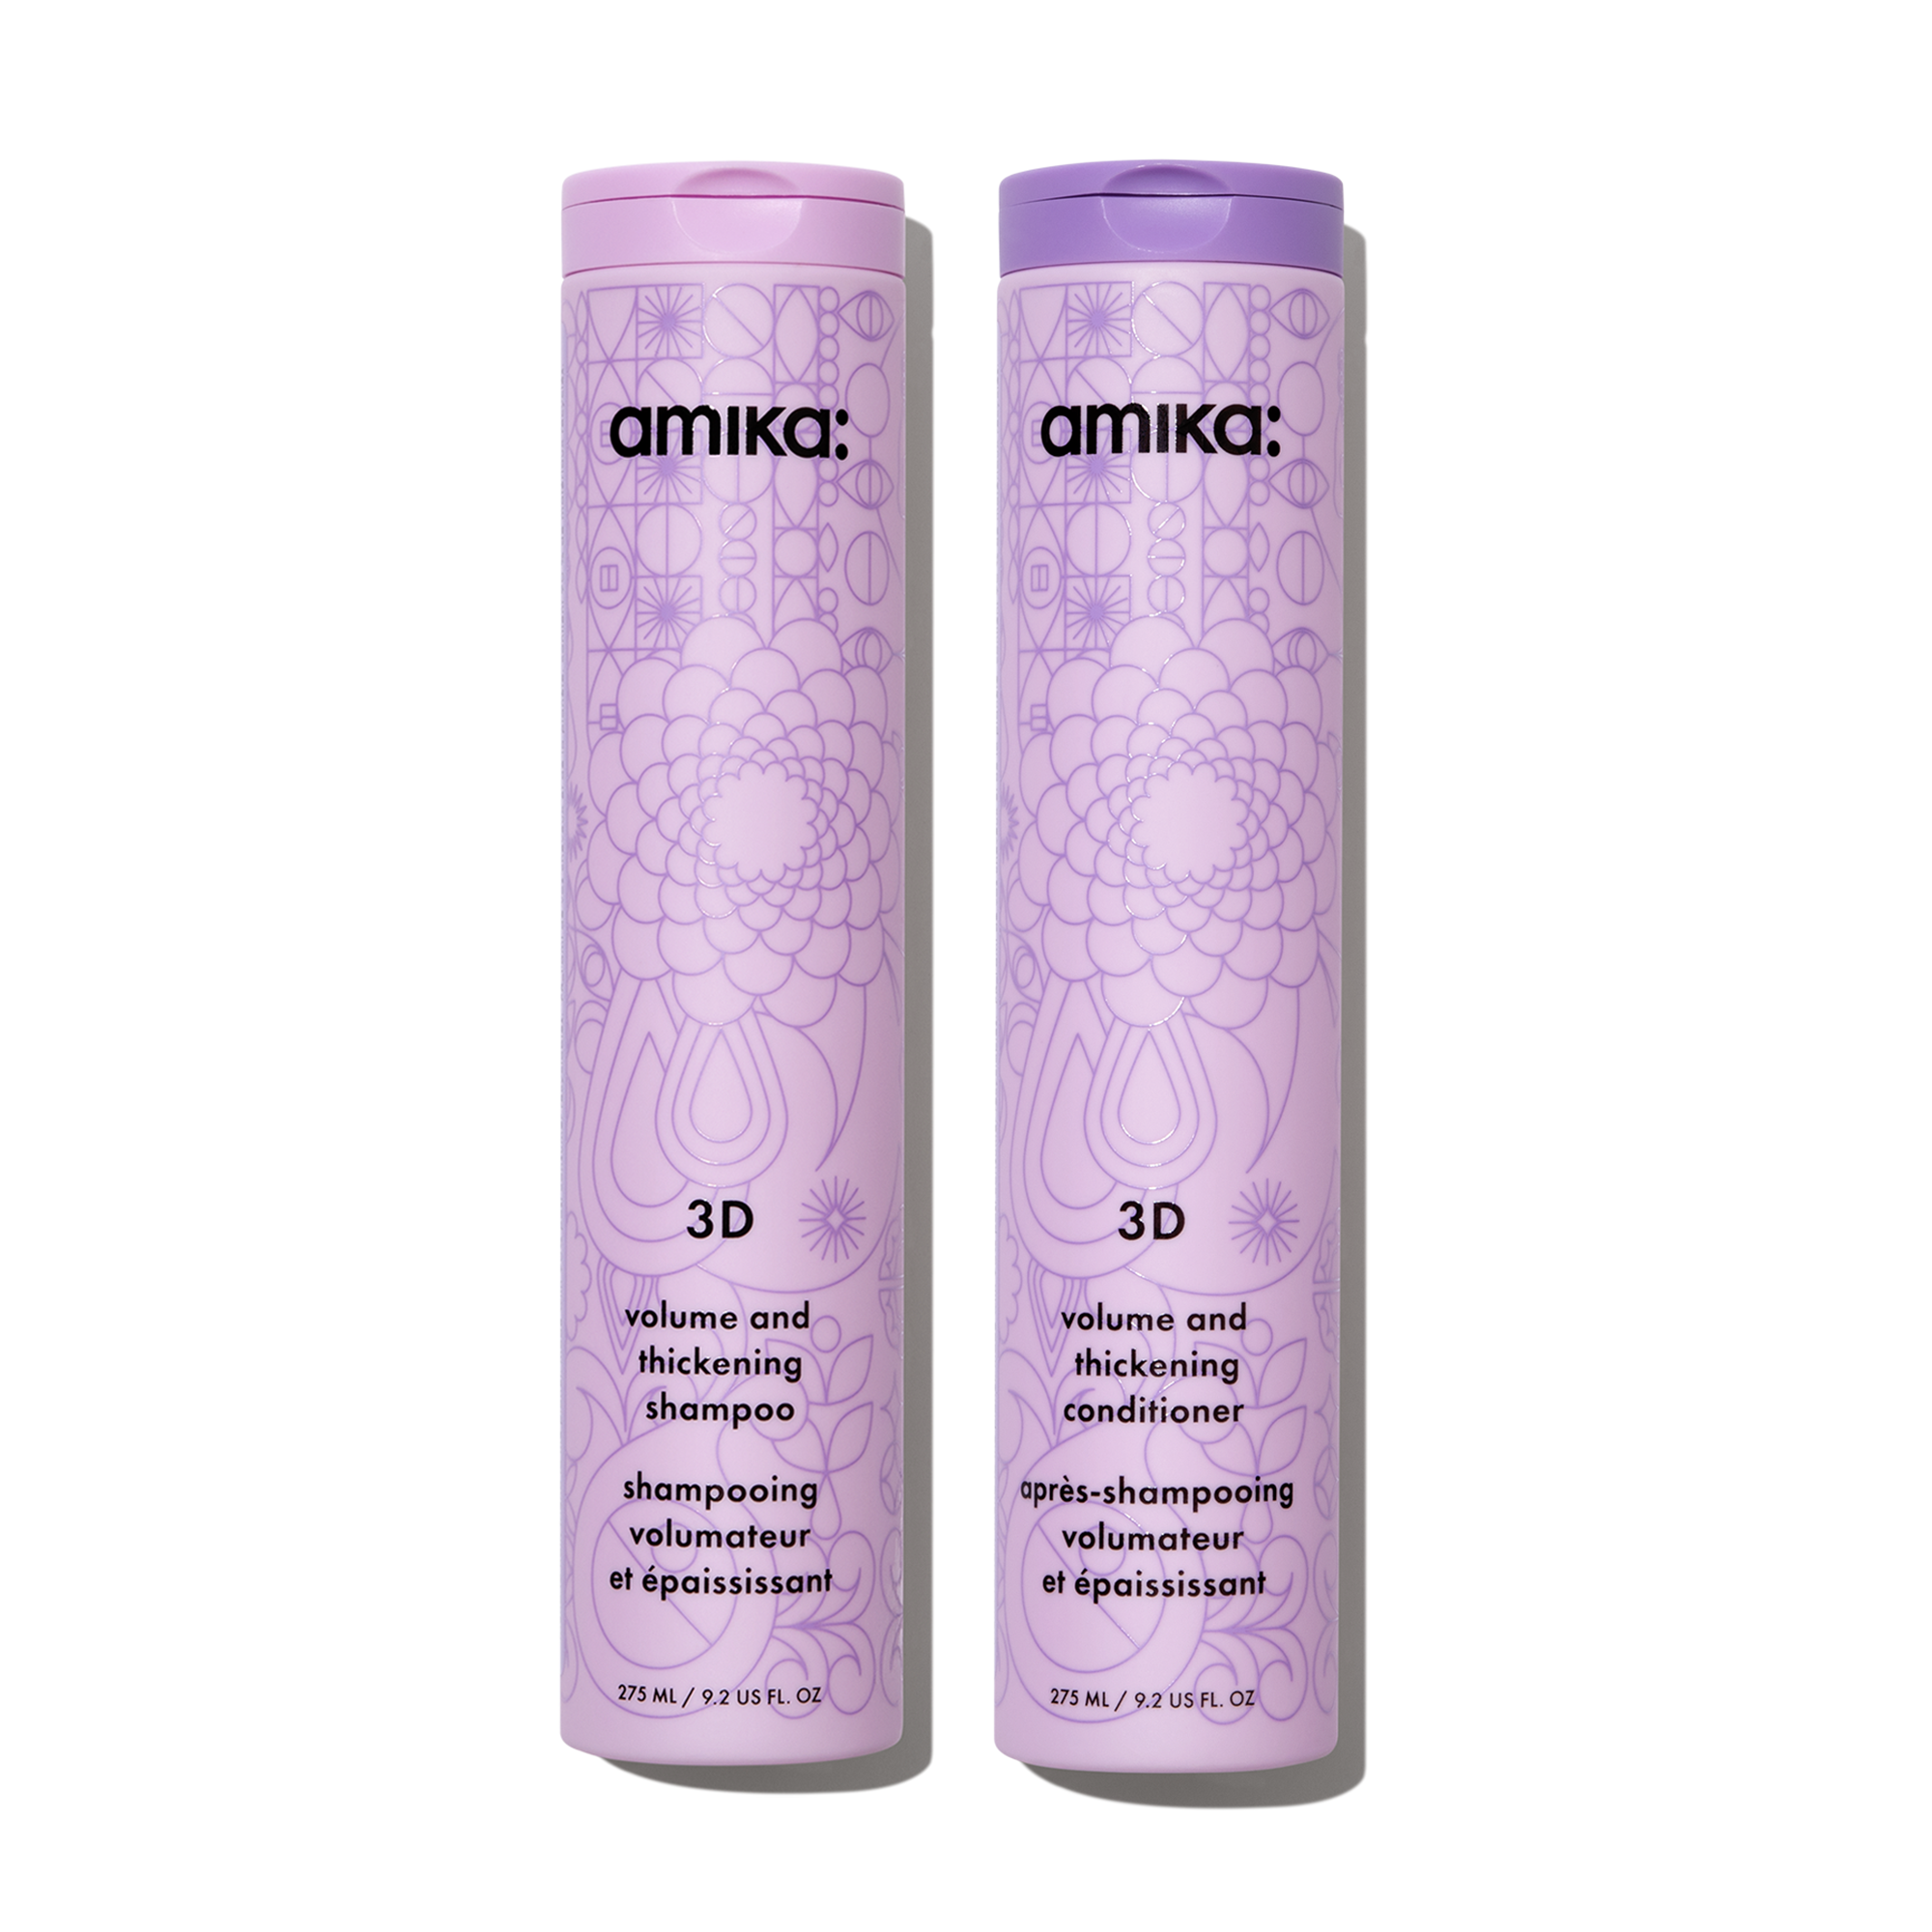 Amika 3D Volume and Thickening Shampoo and Conditioner Duo - 9.2oz ($52 Value) / 9.2OZ